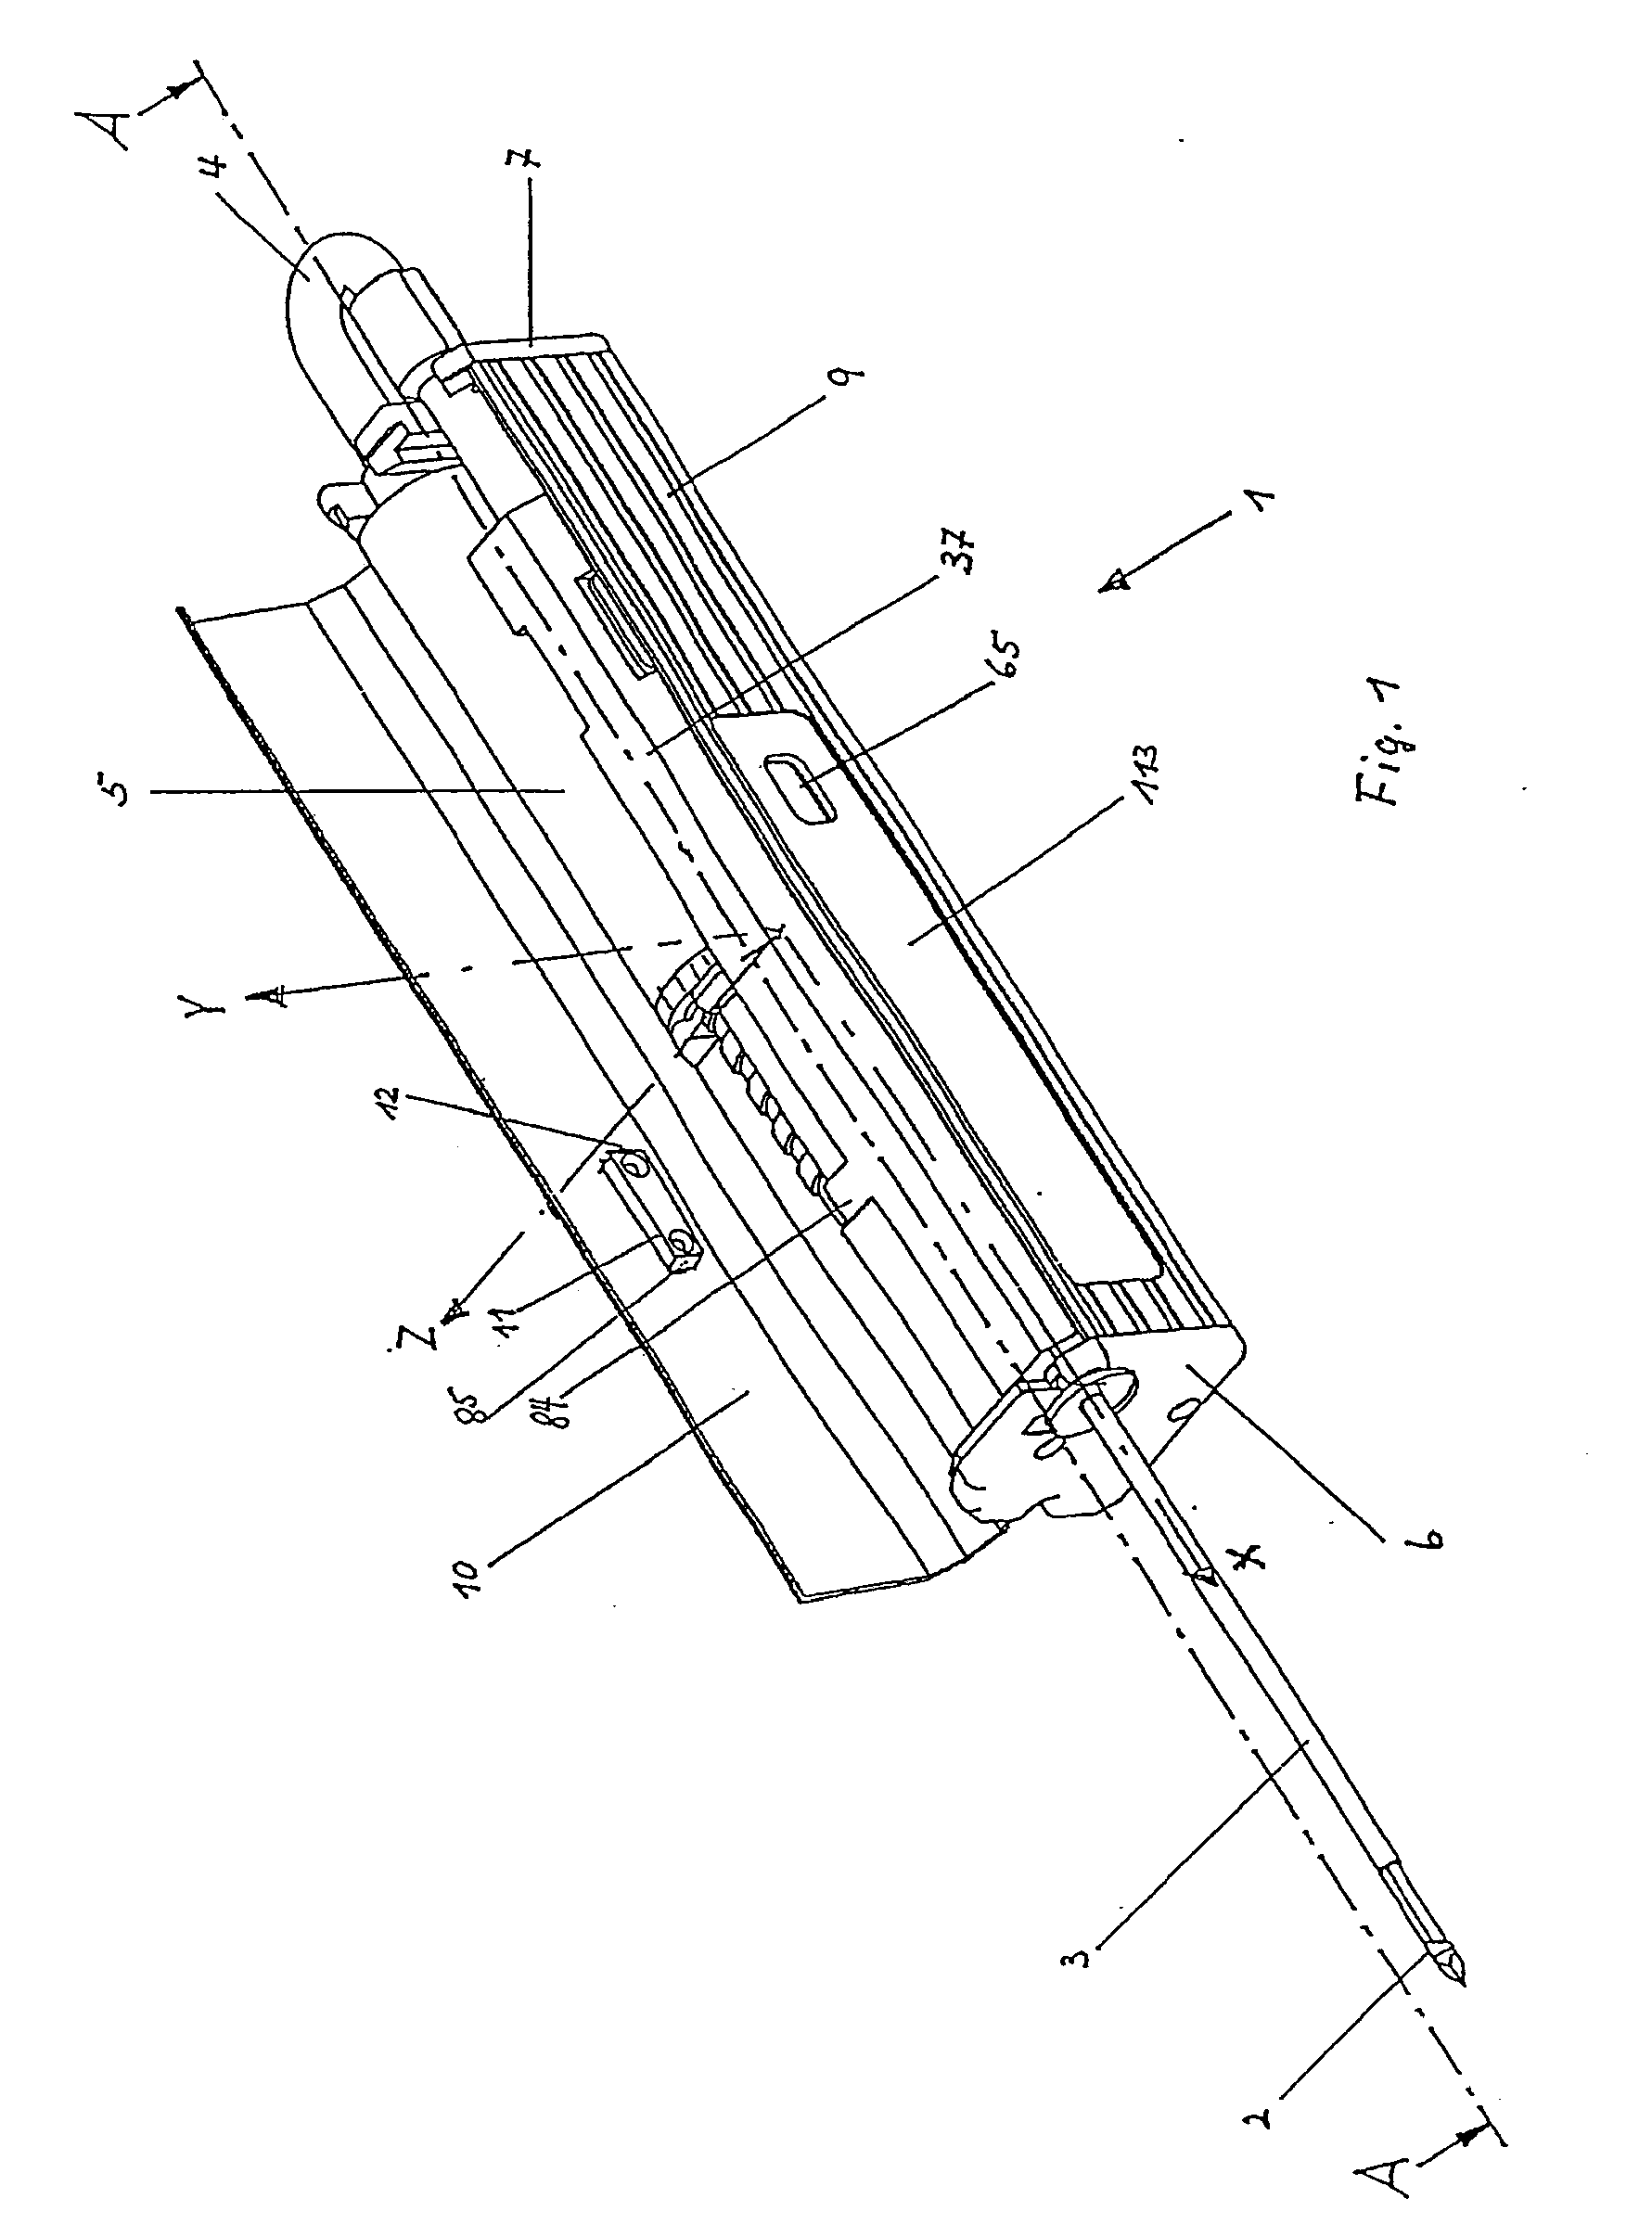 Biopsy device for removing tissue specimens using a vacuum